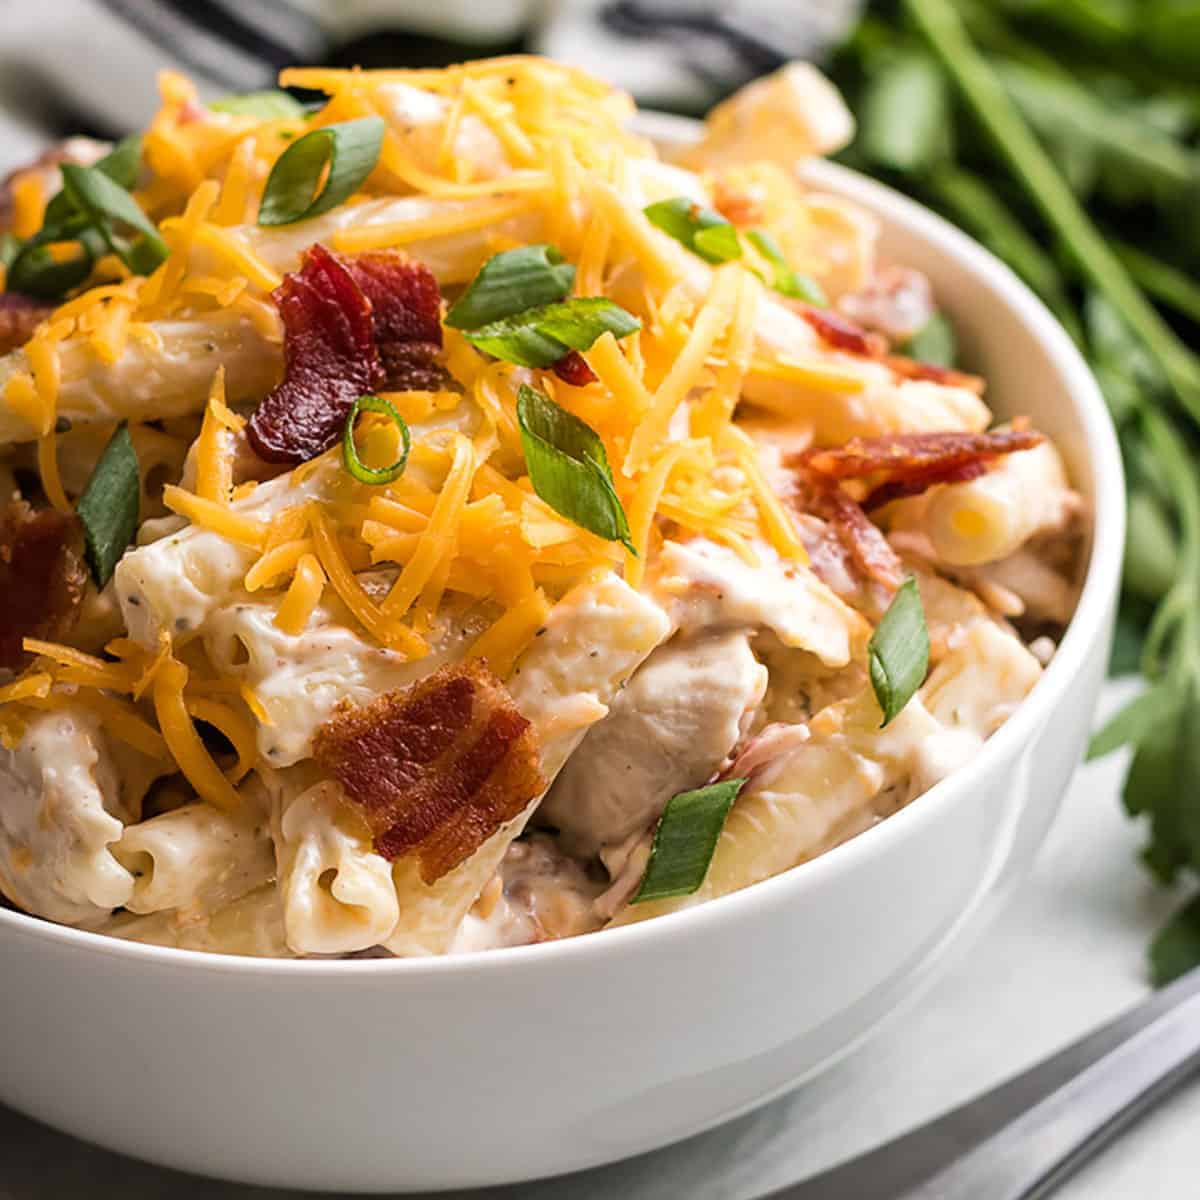 The cold chicken bacon ranch pasta in a bowl.